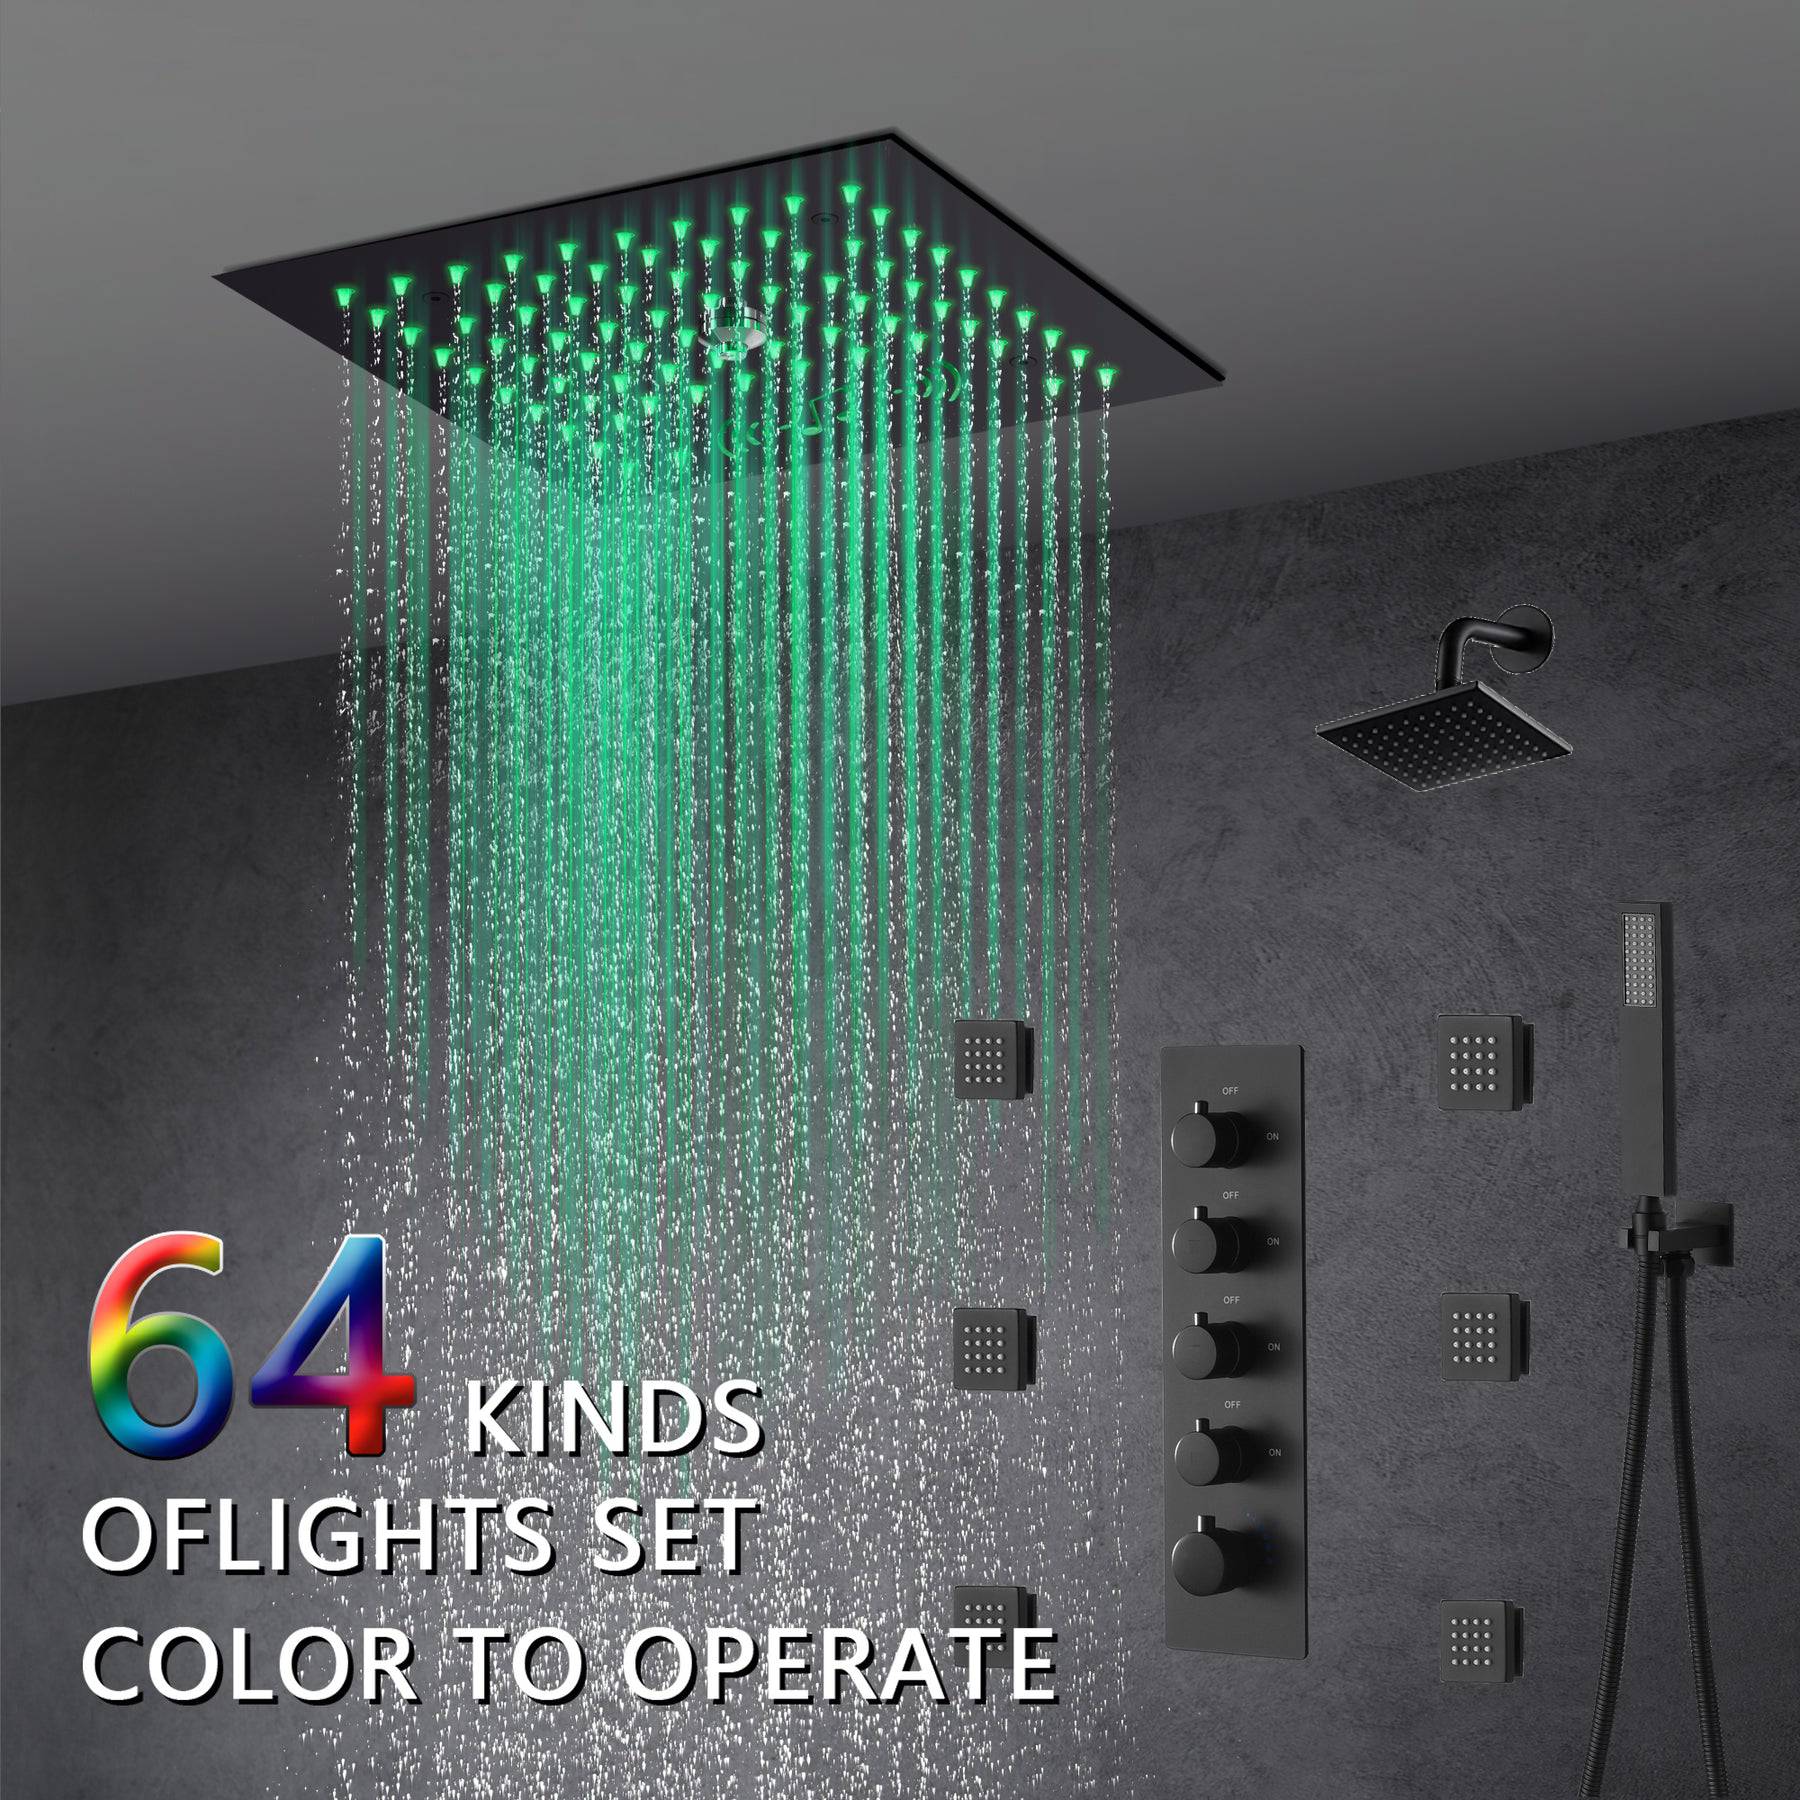 12-Inch Matte Black Flush Mount Shower Faucet Set with Digital Display: 4-Way Thermostatic Control, 64-Color LED Lights, Bluetooth Music, Body Sprayers and Regular Head